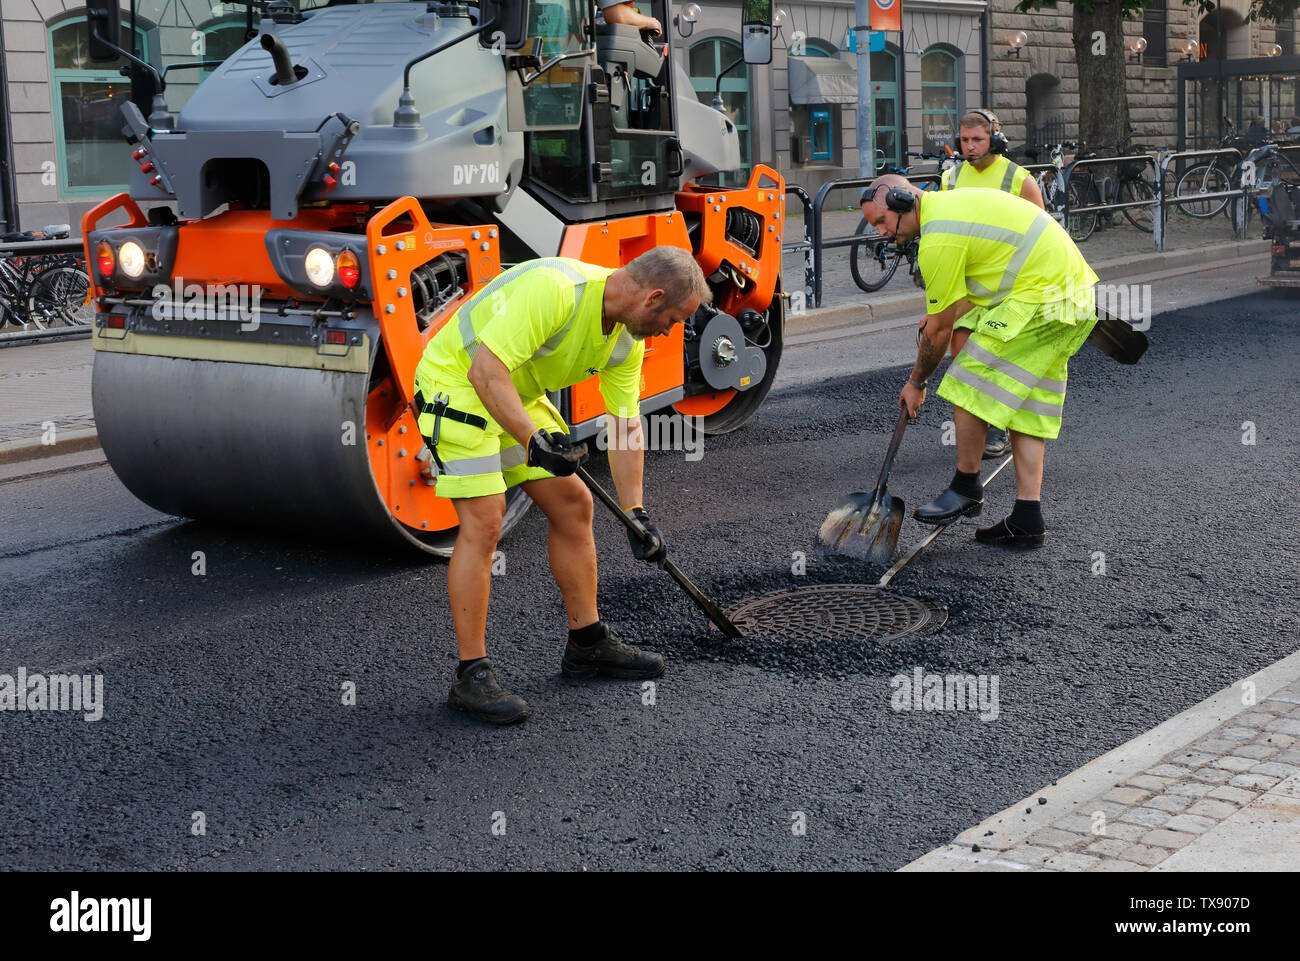 Karlstad, Sweden - June 19, 2019: Road workers asphalting manualy the area around a manhole. Stock Photo